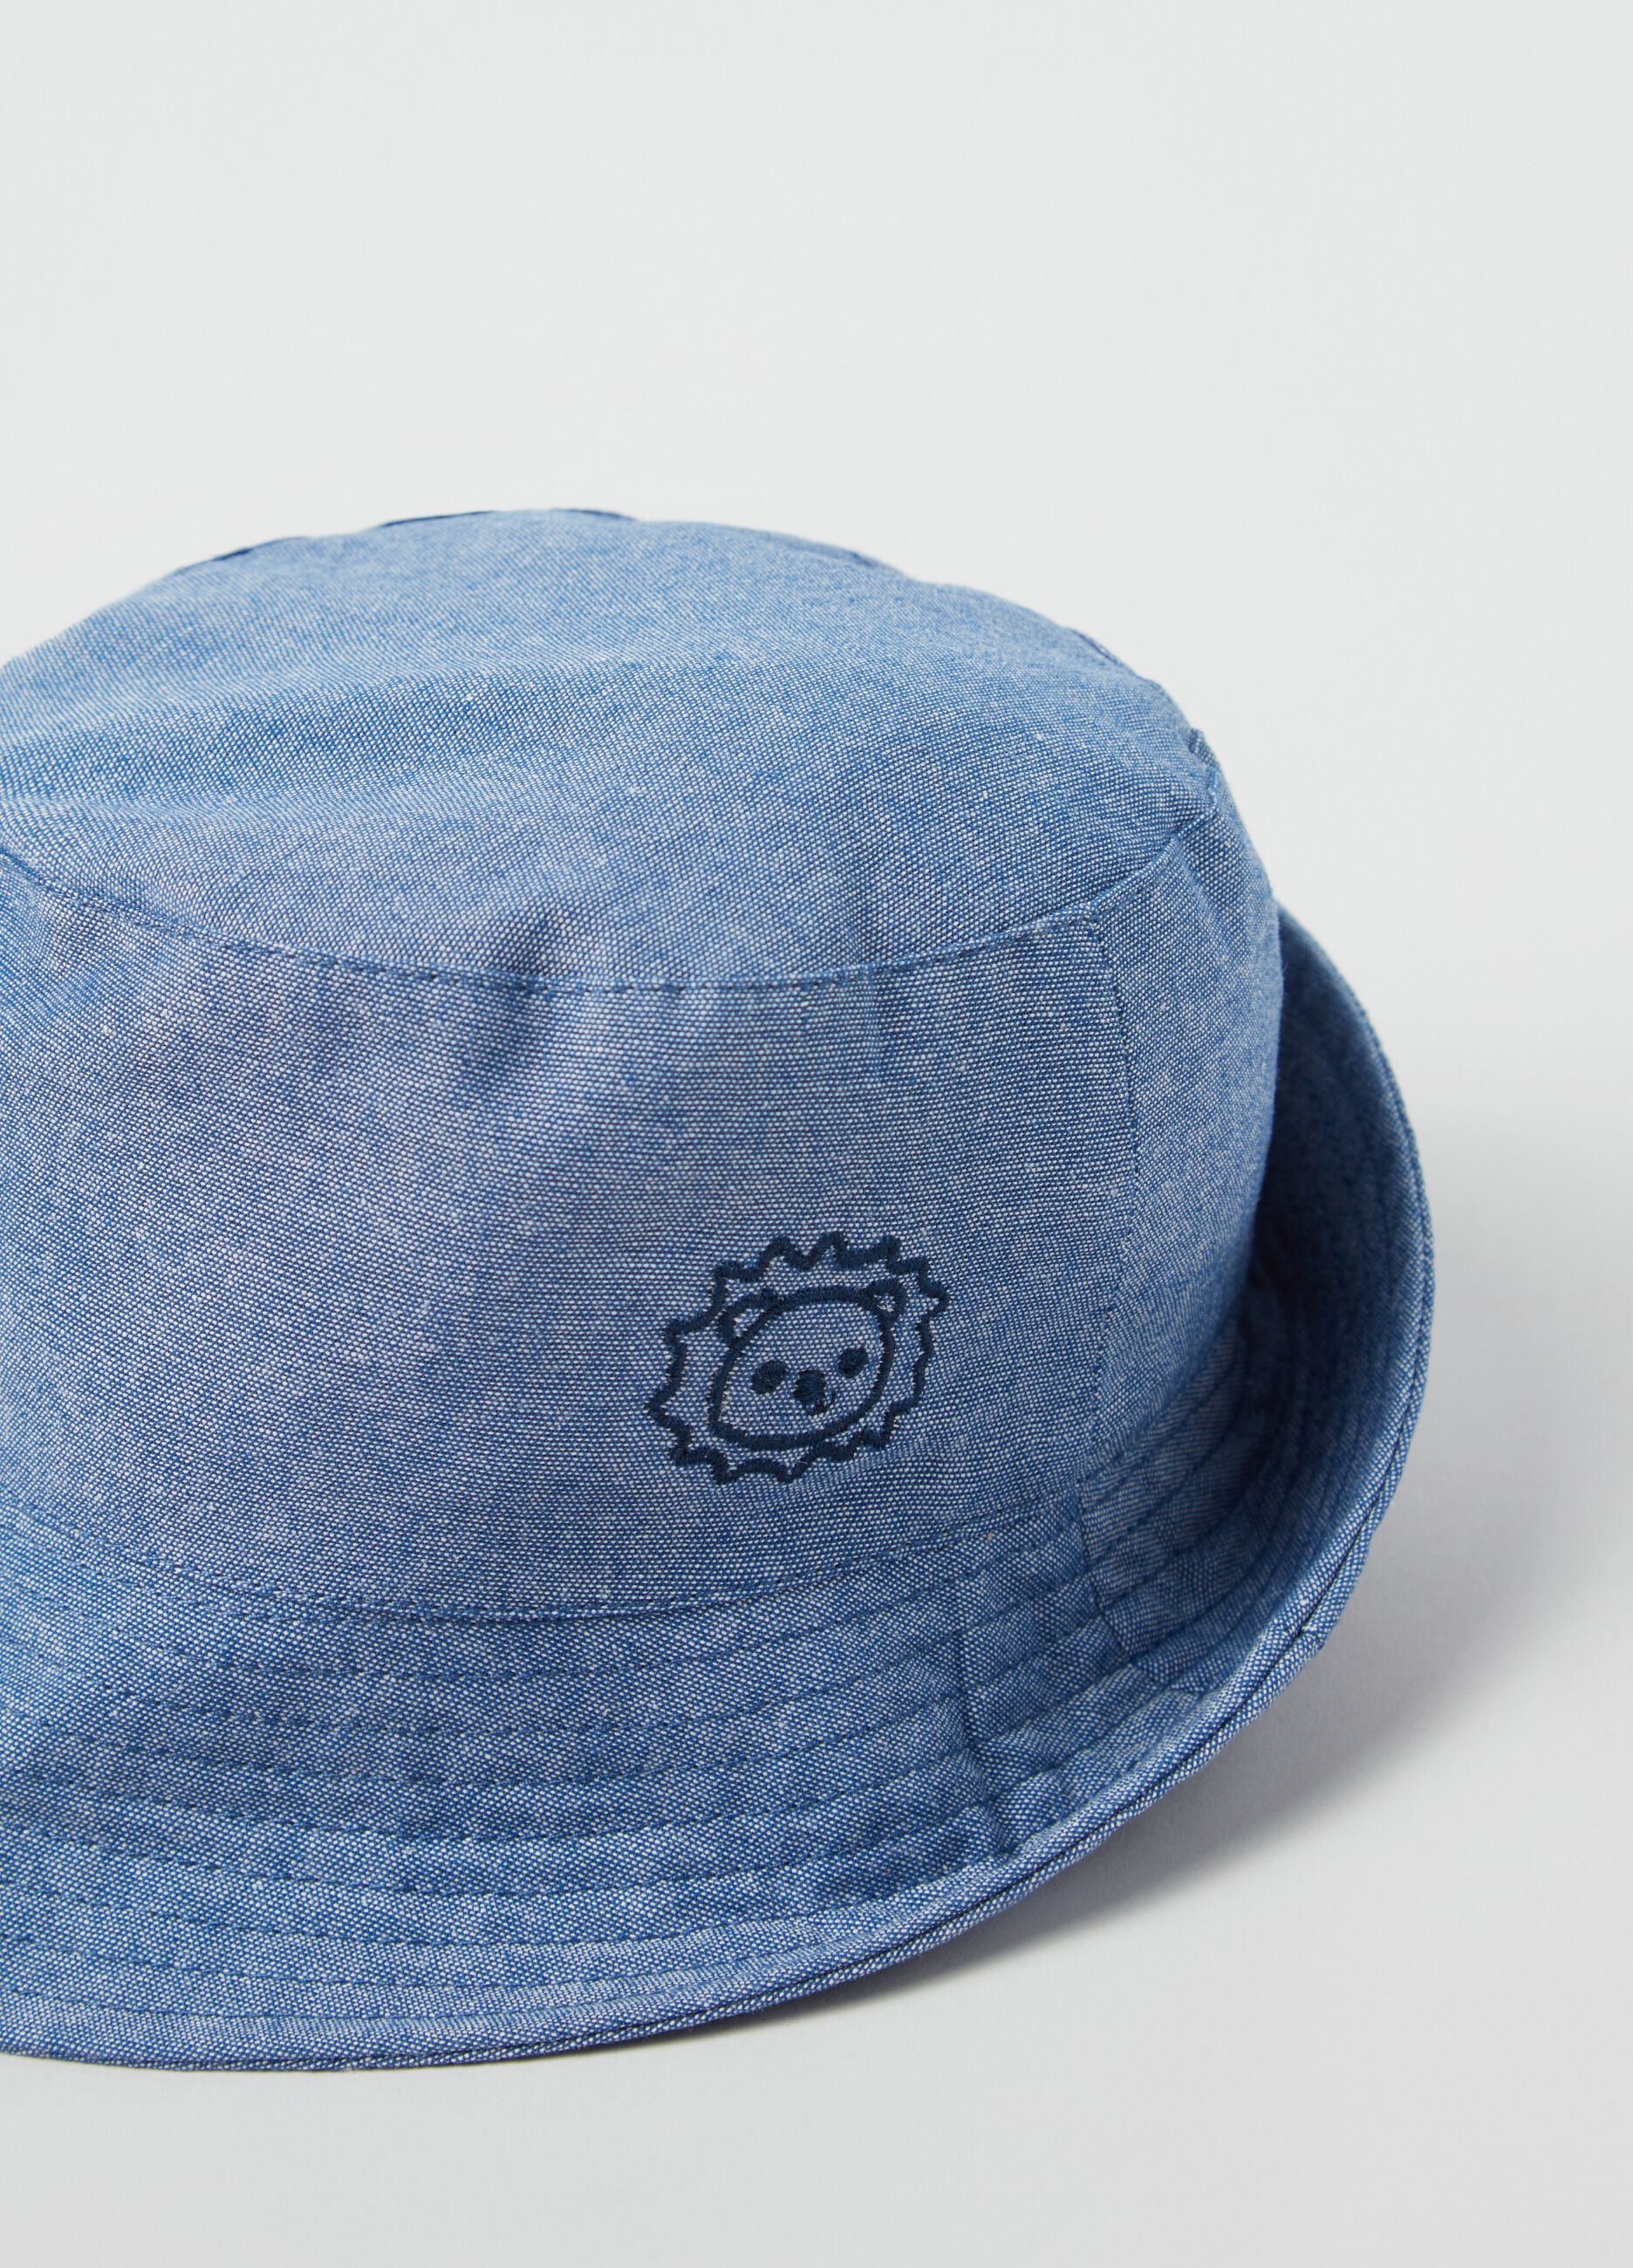 Fishing hat with lion embroidery